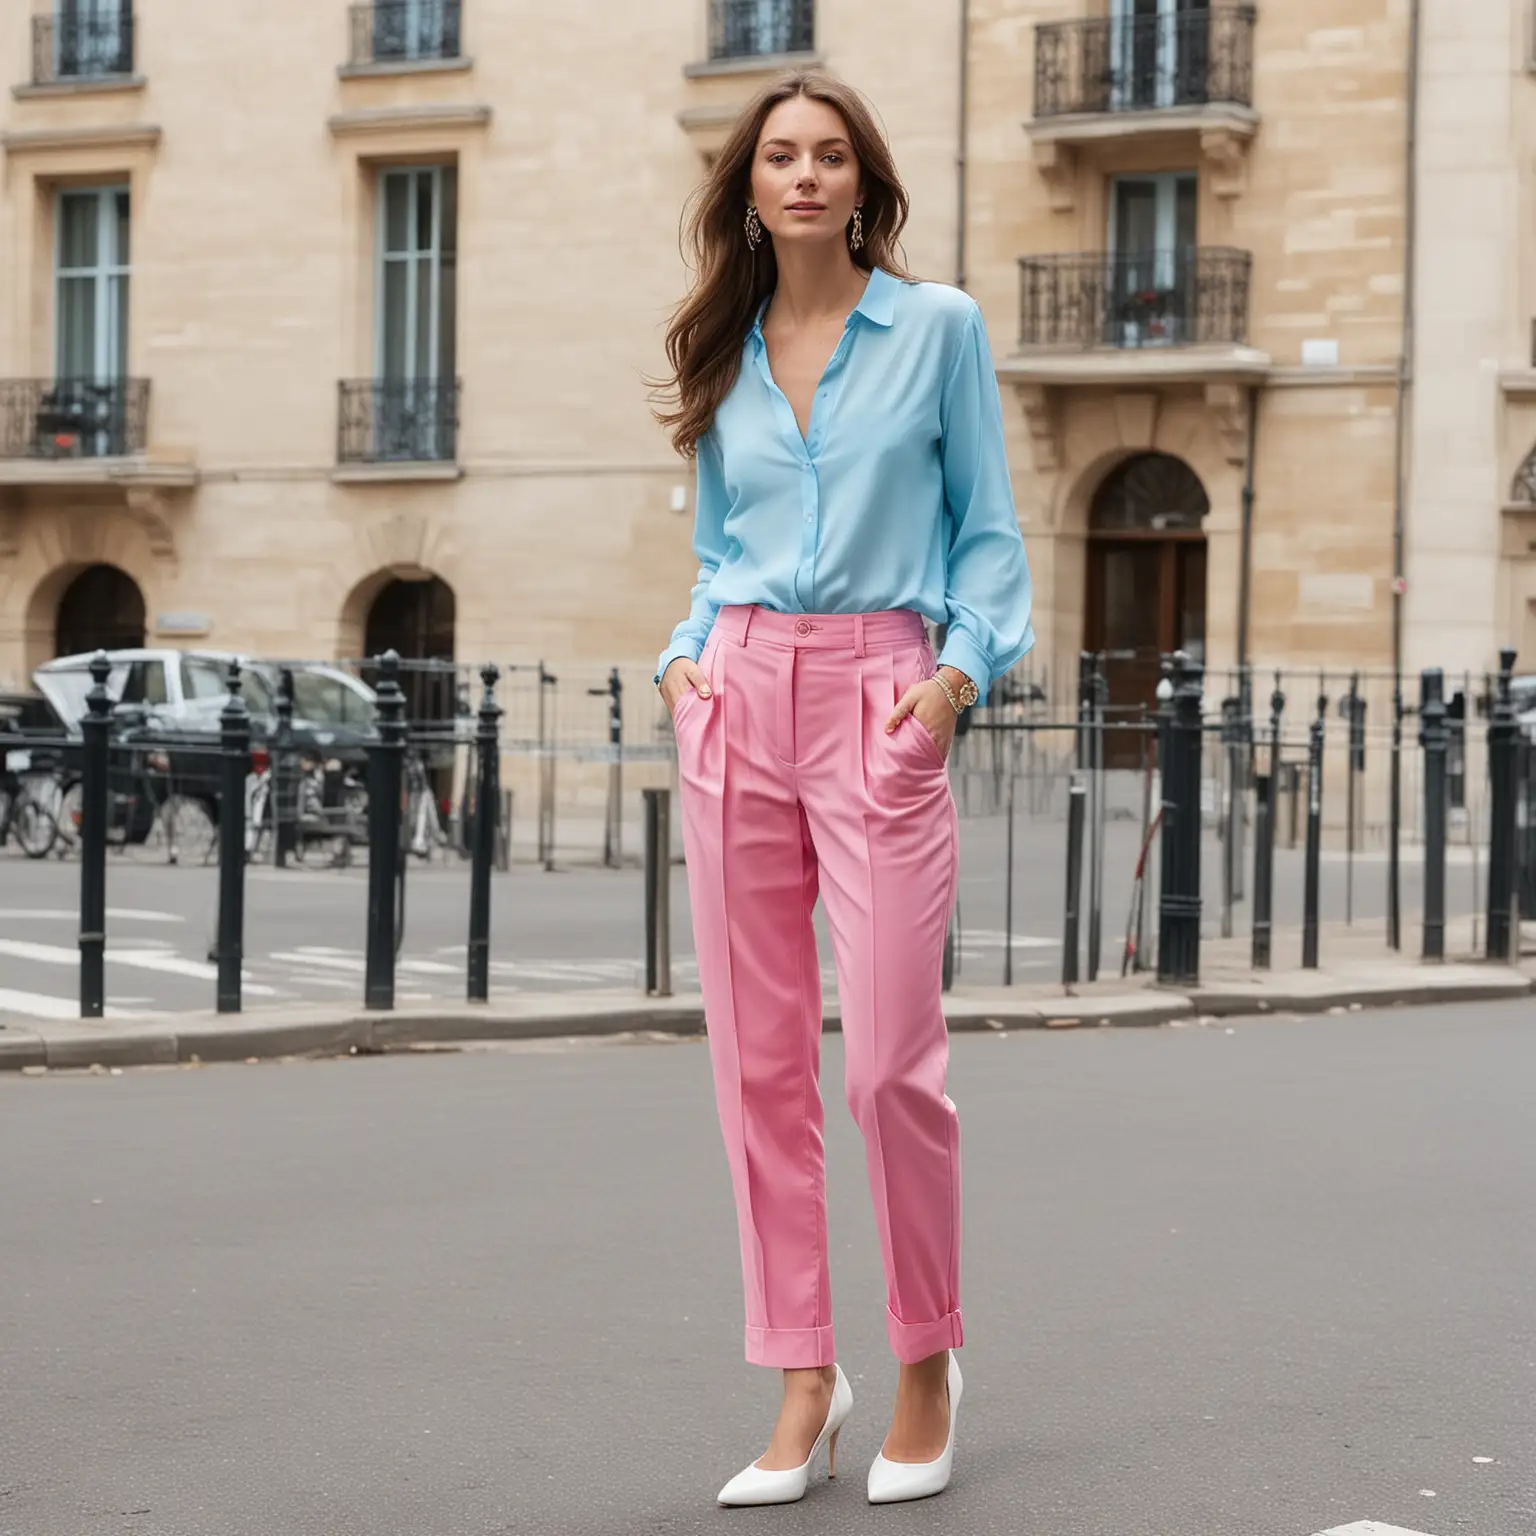 Fashionable Woman in Paris with Vibrant Pink Pants and Light Blue Blouse